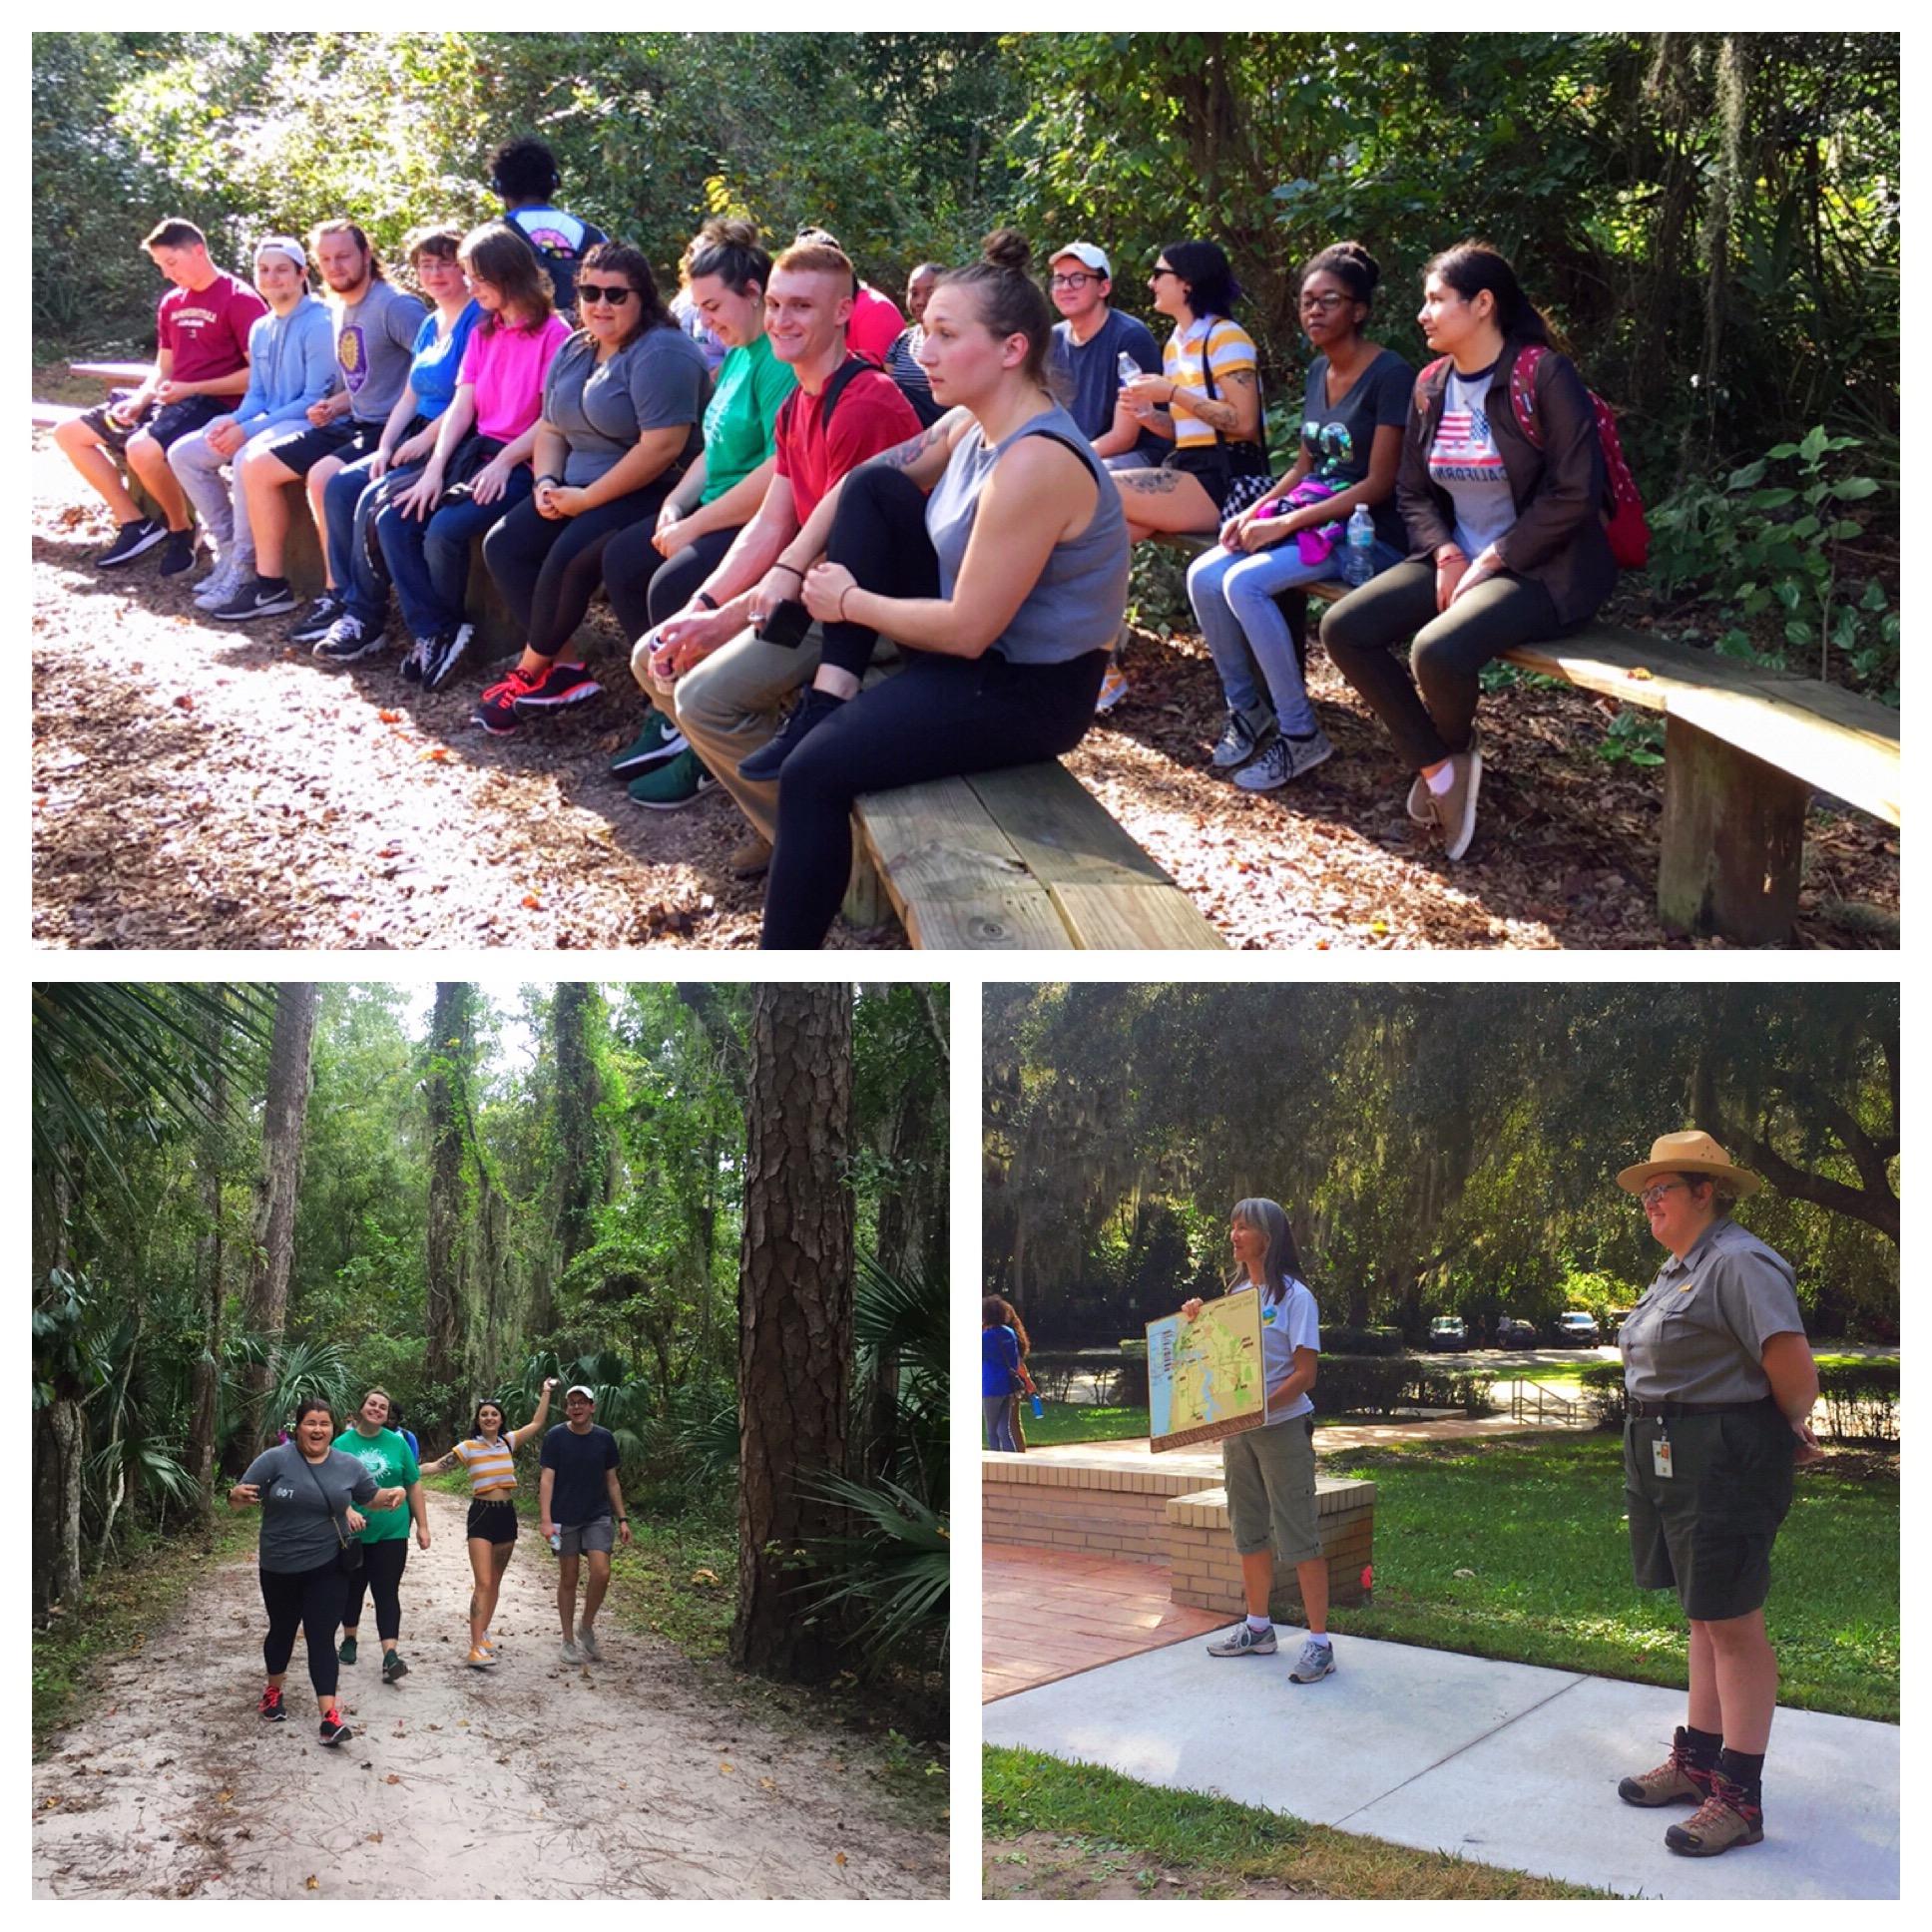 Collage of images of students’ site visit to Timucuan Ecological and Historic Preserve.